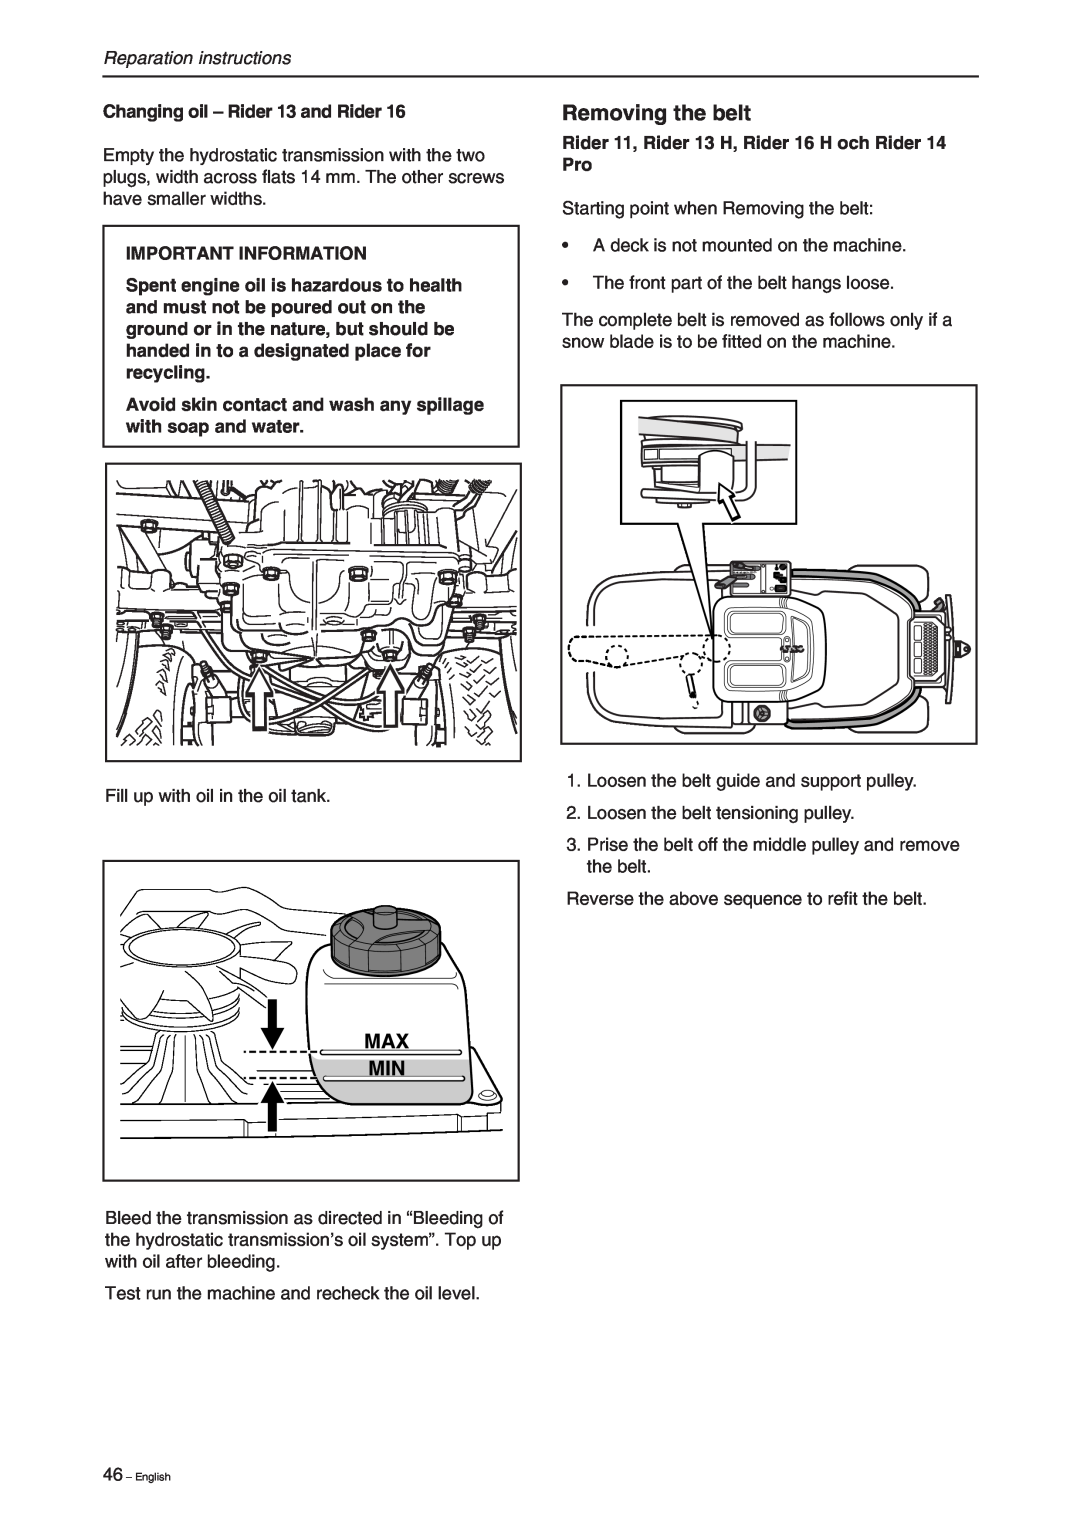 Briggs & Stratton RIDER 13 BIO, RIDER 11 Removing the belt, Changing oil - Rider 13 and Rider, Reparation instructions 